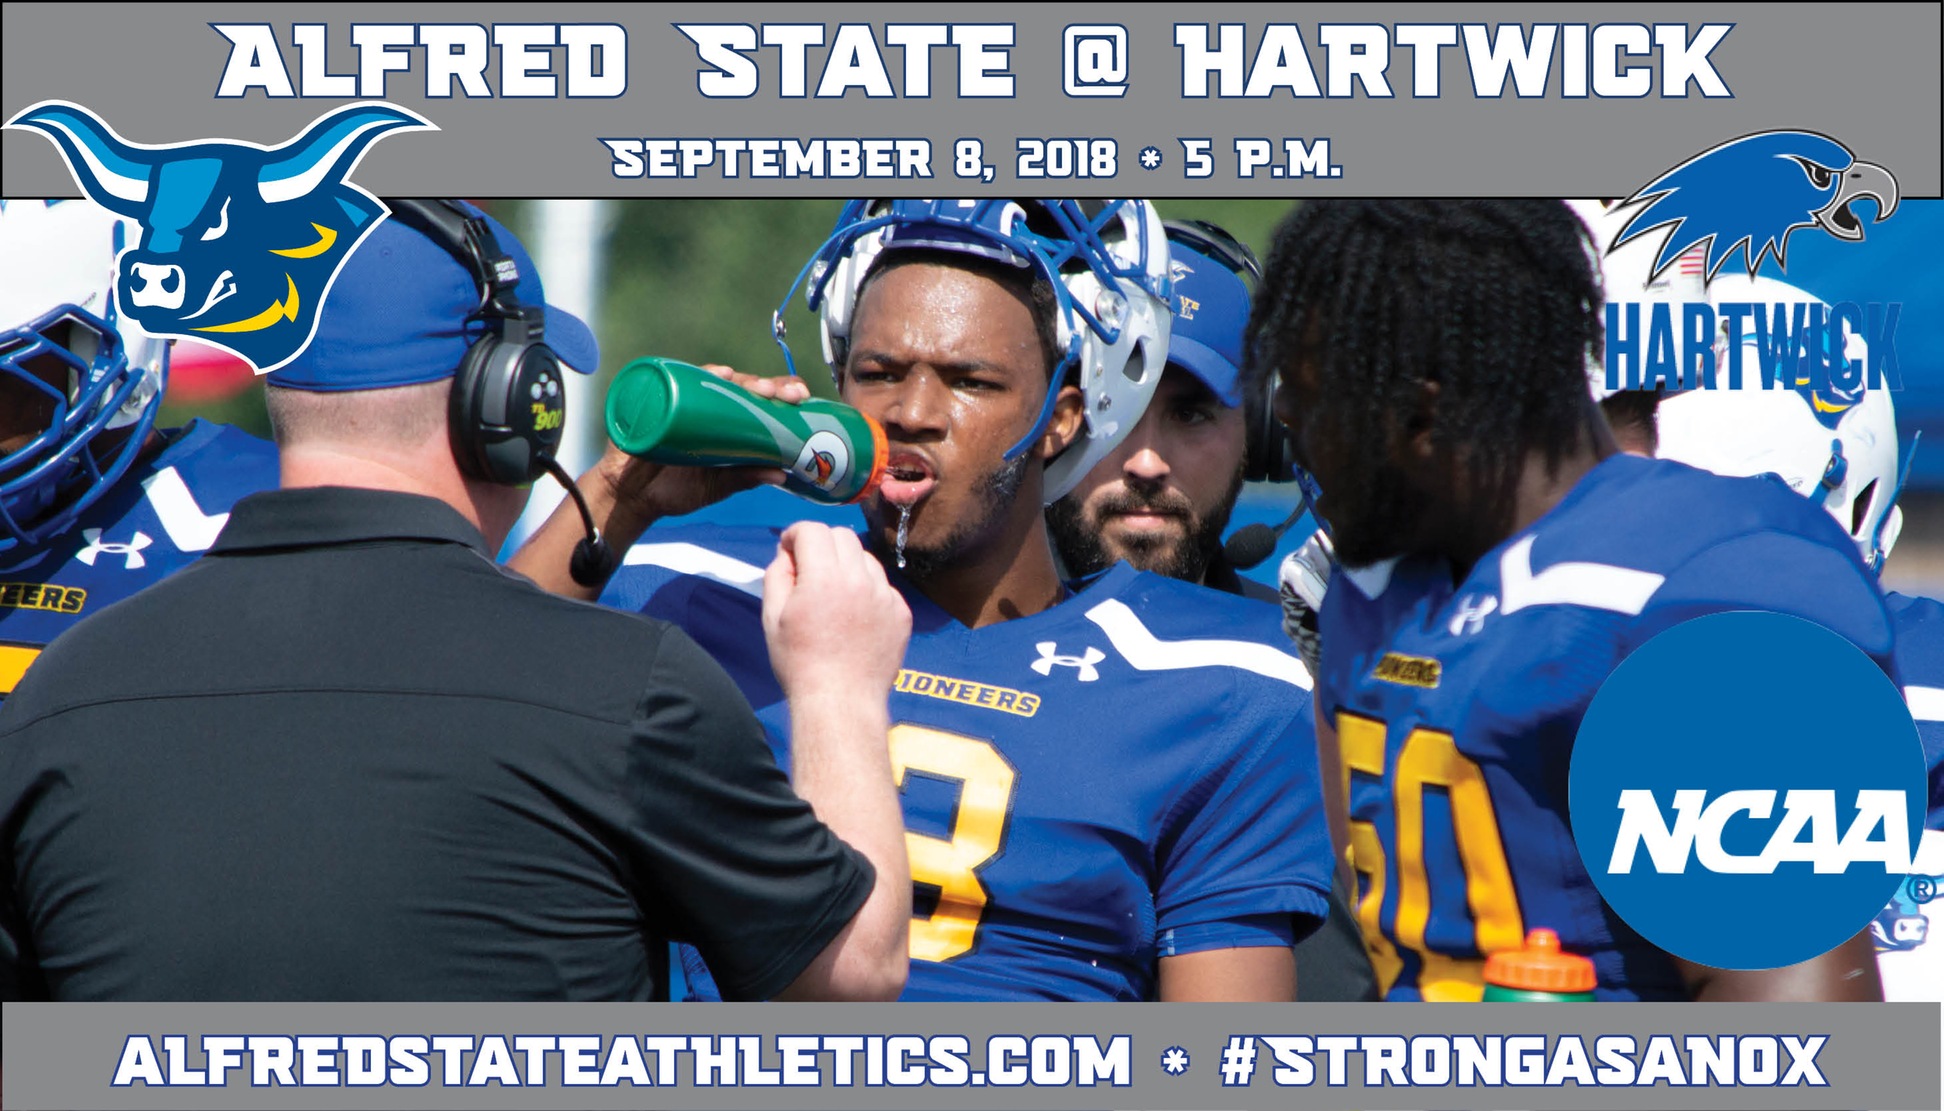 Alfred State battles Hartwick in their first road contest of 2018